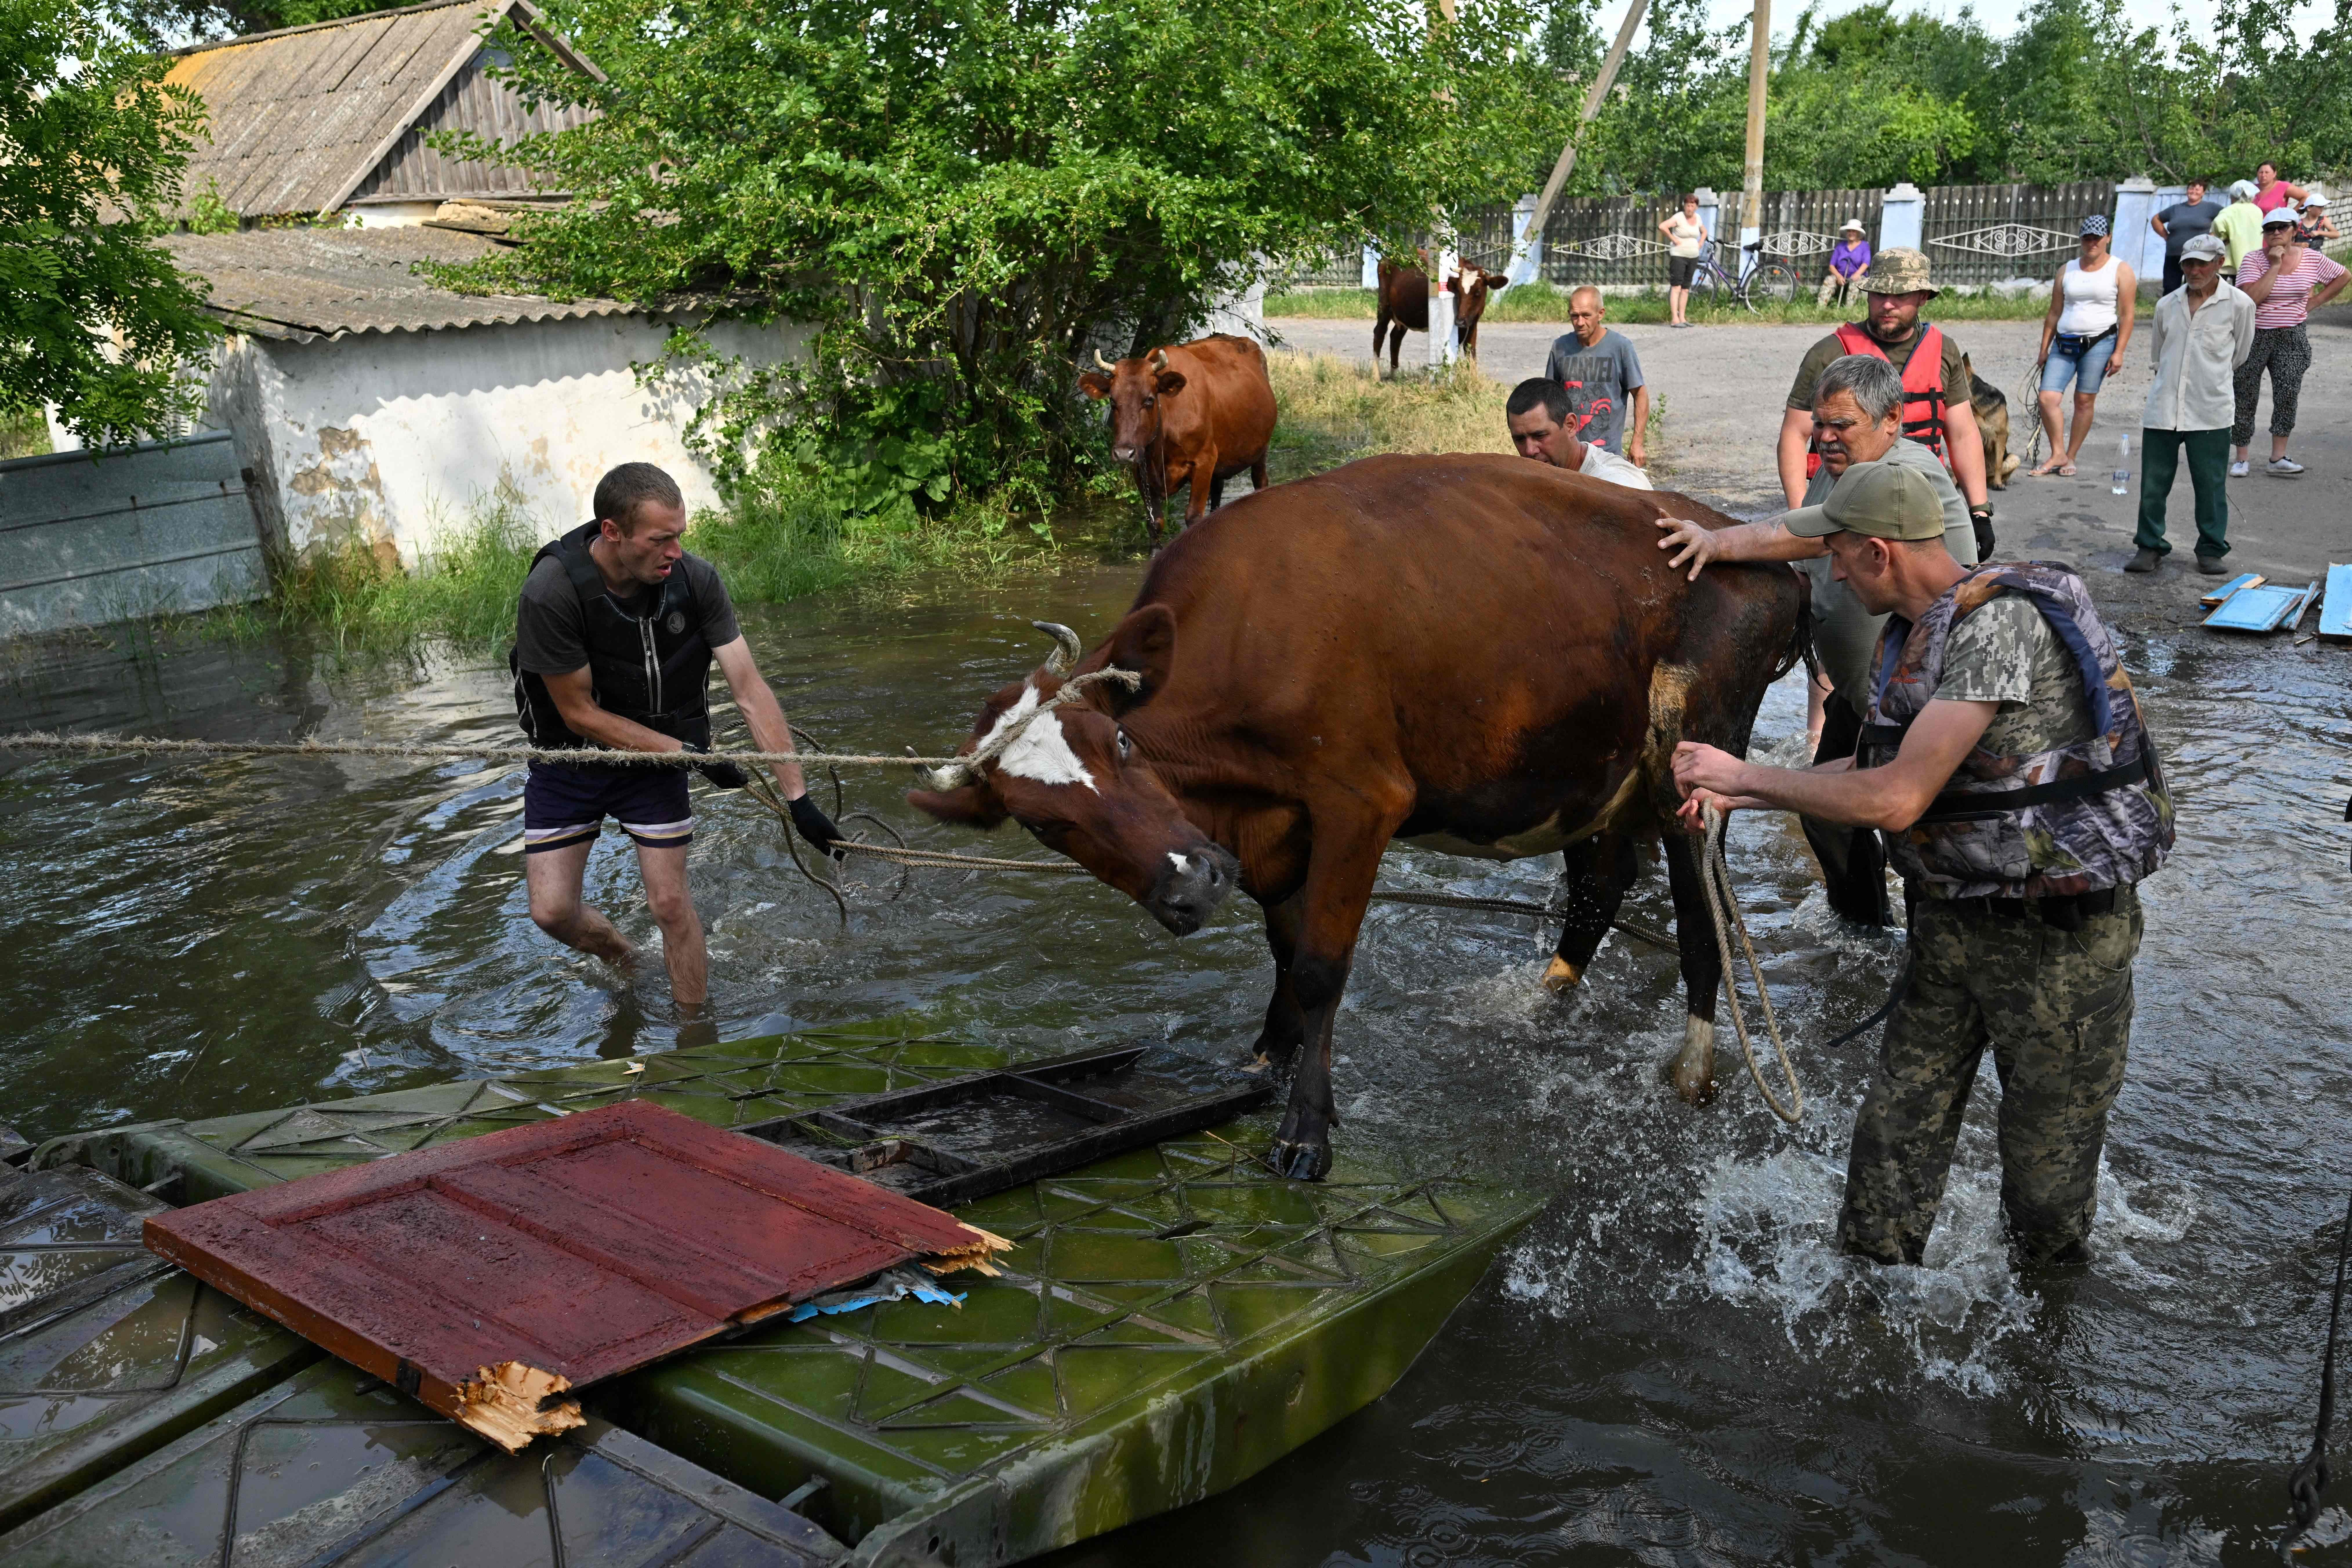 Ukrainian troops and residents bring a cow from a flooded road onto a boat.